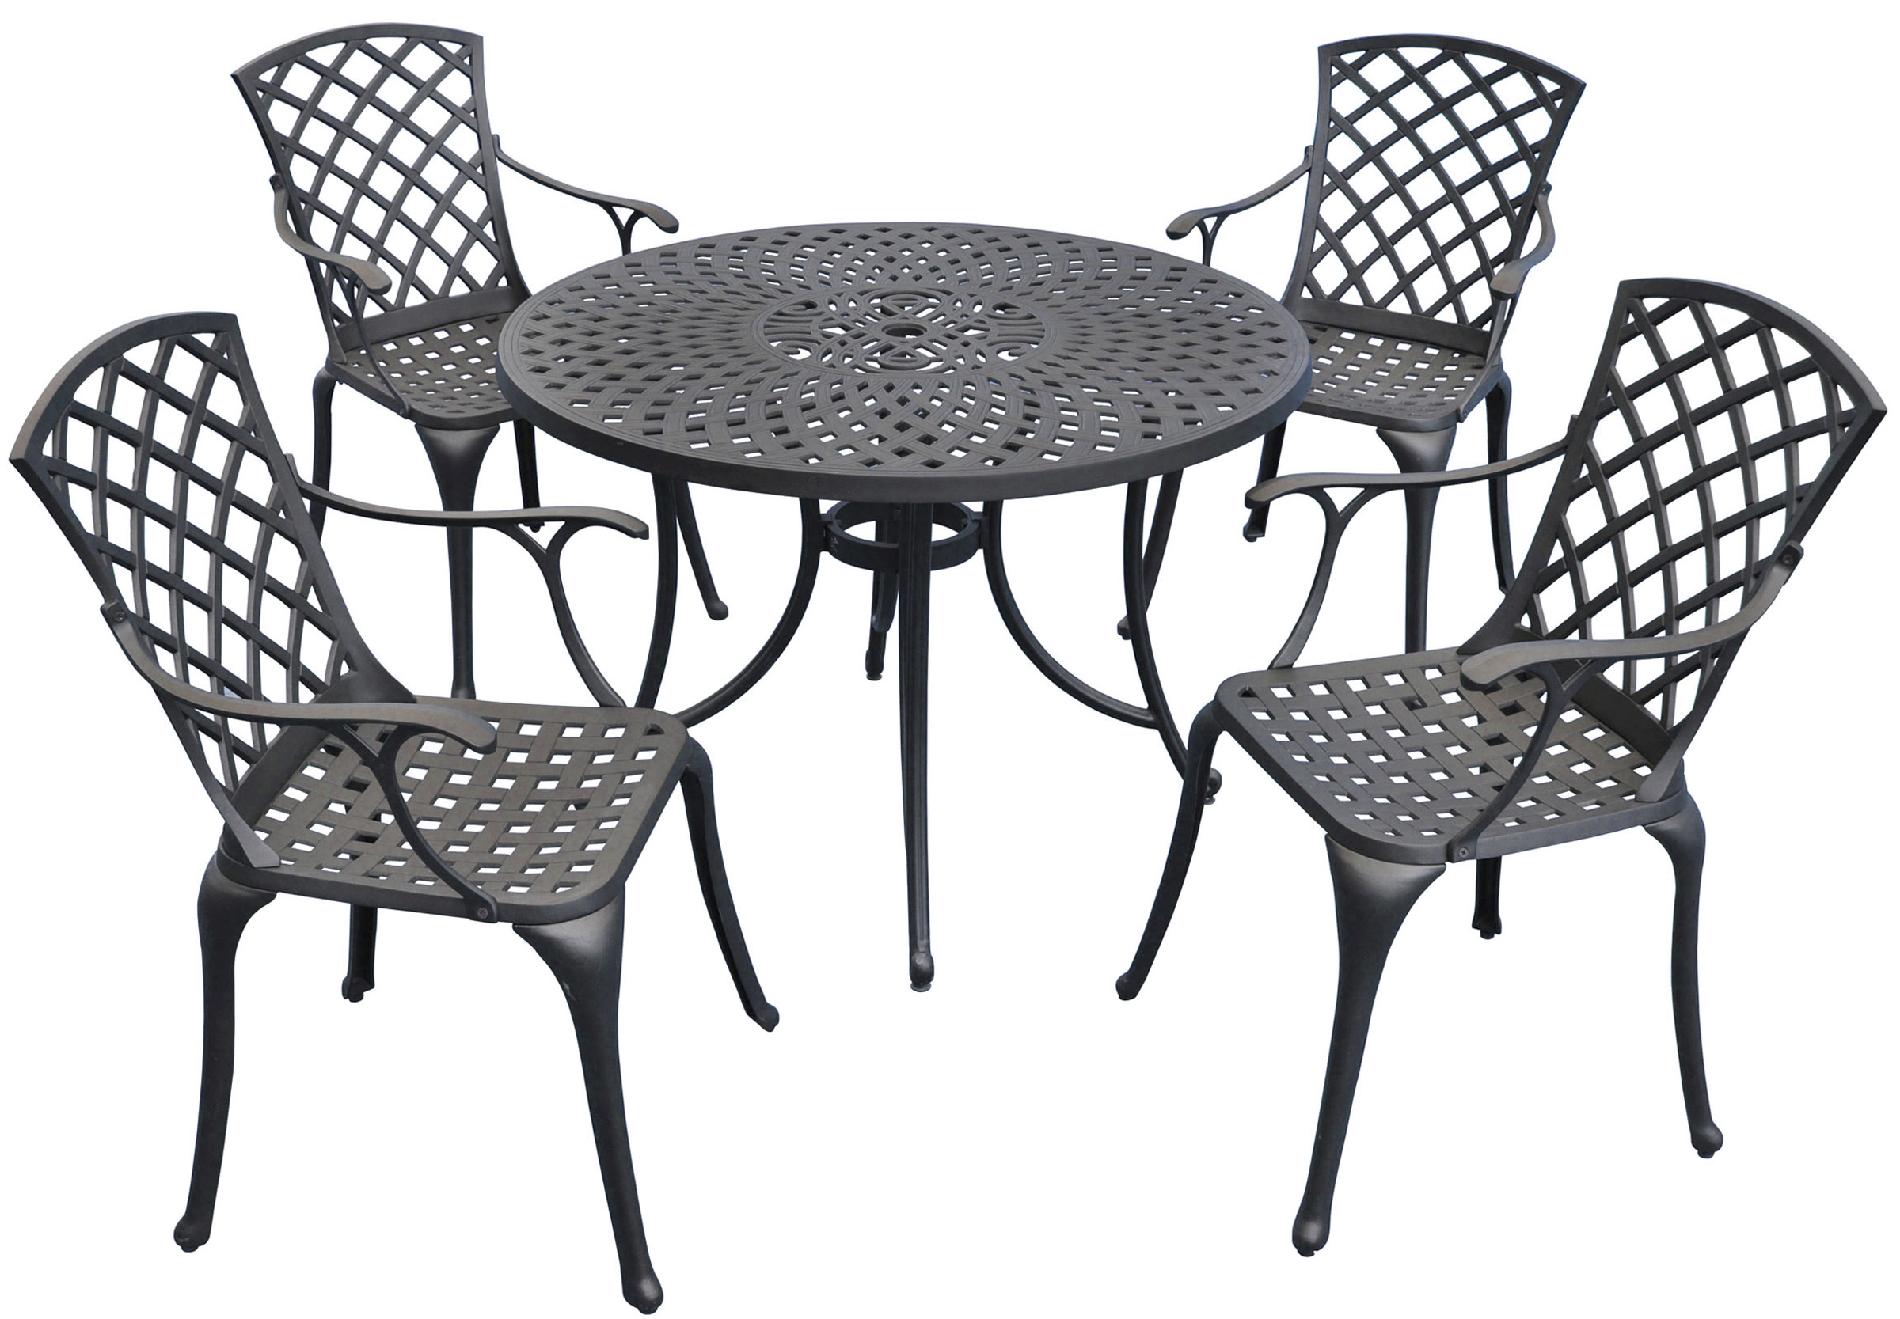 Crosley Outdoor Sedona Five Piece Cast Aluminum Outdoor Dining Set with High Back Arm Chairs